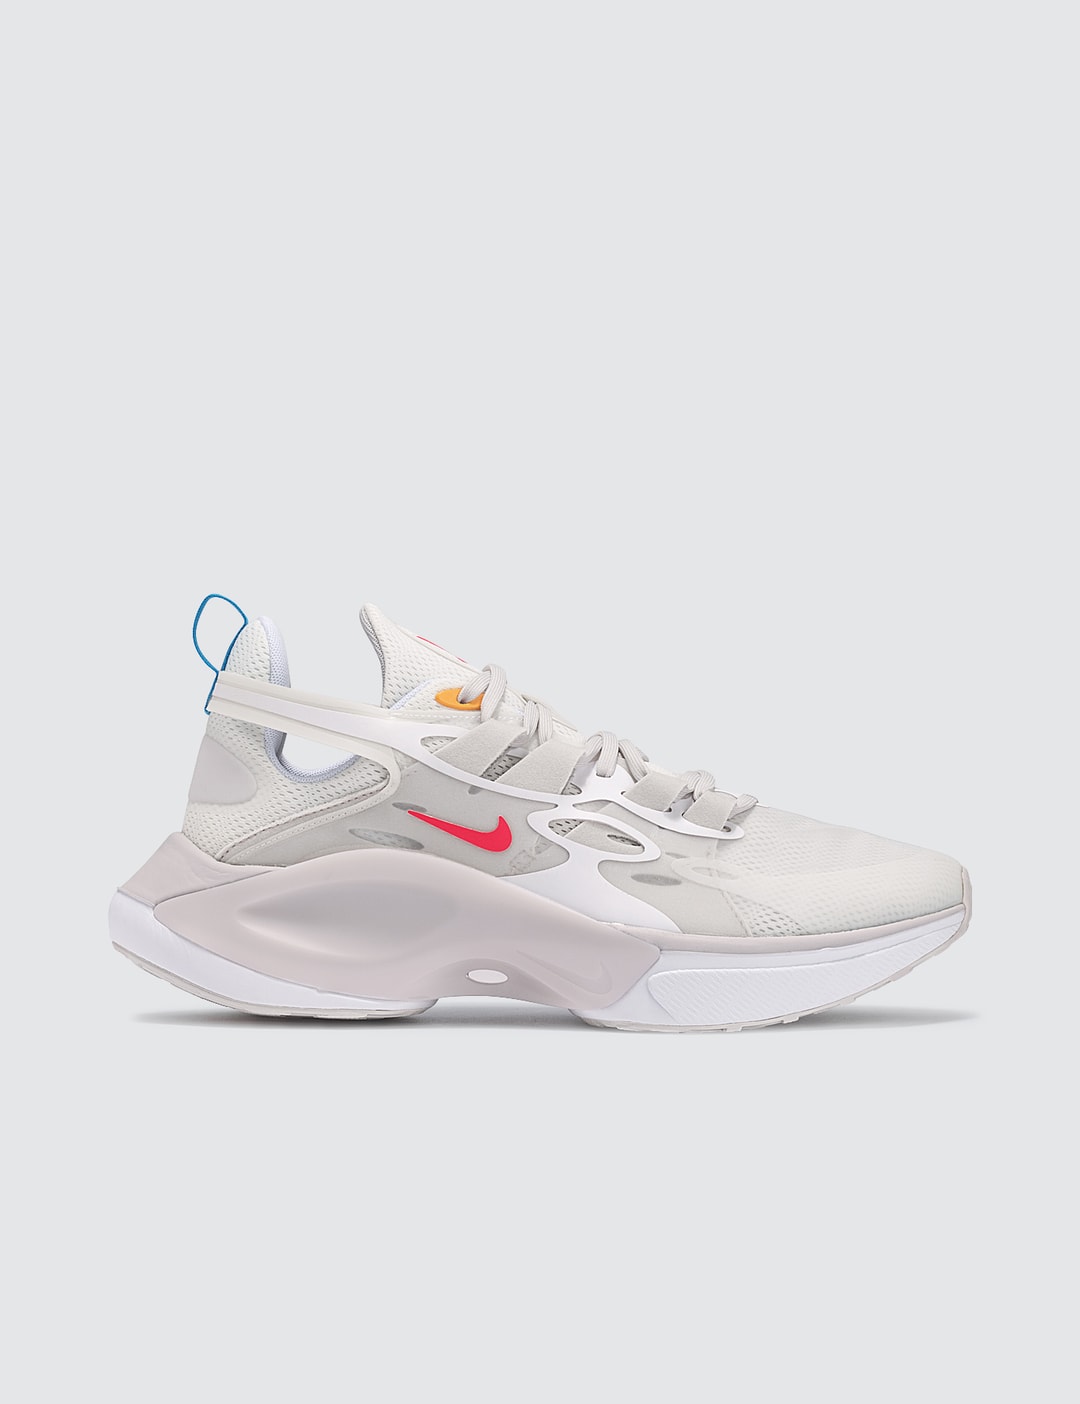 Nike - Nike Signal D/MS/X | HBX - Globally Curated Fashion and by Hypebeast